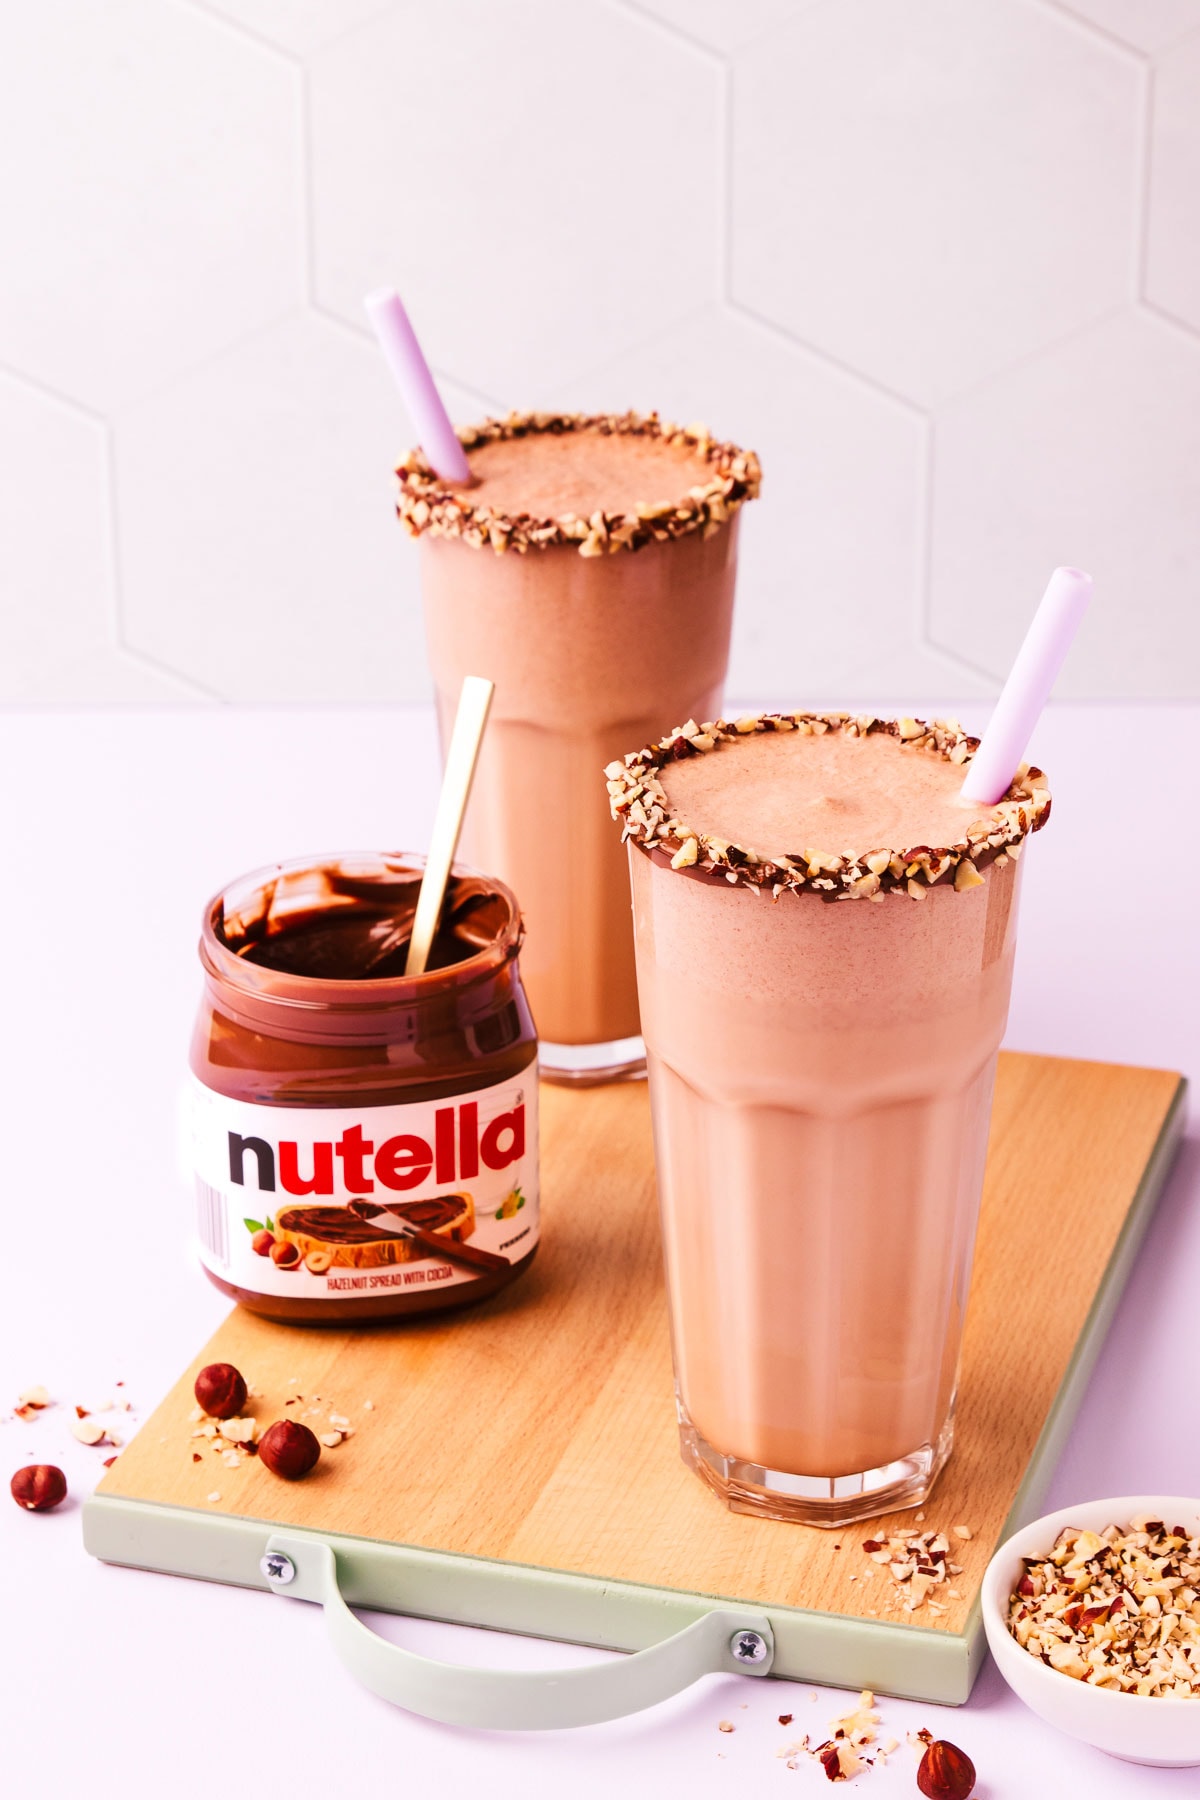 Two Nutella milkshakes on a small wooden chopping board, with an open jar of Nutella and scattered chopped and whole hazelnuts.